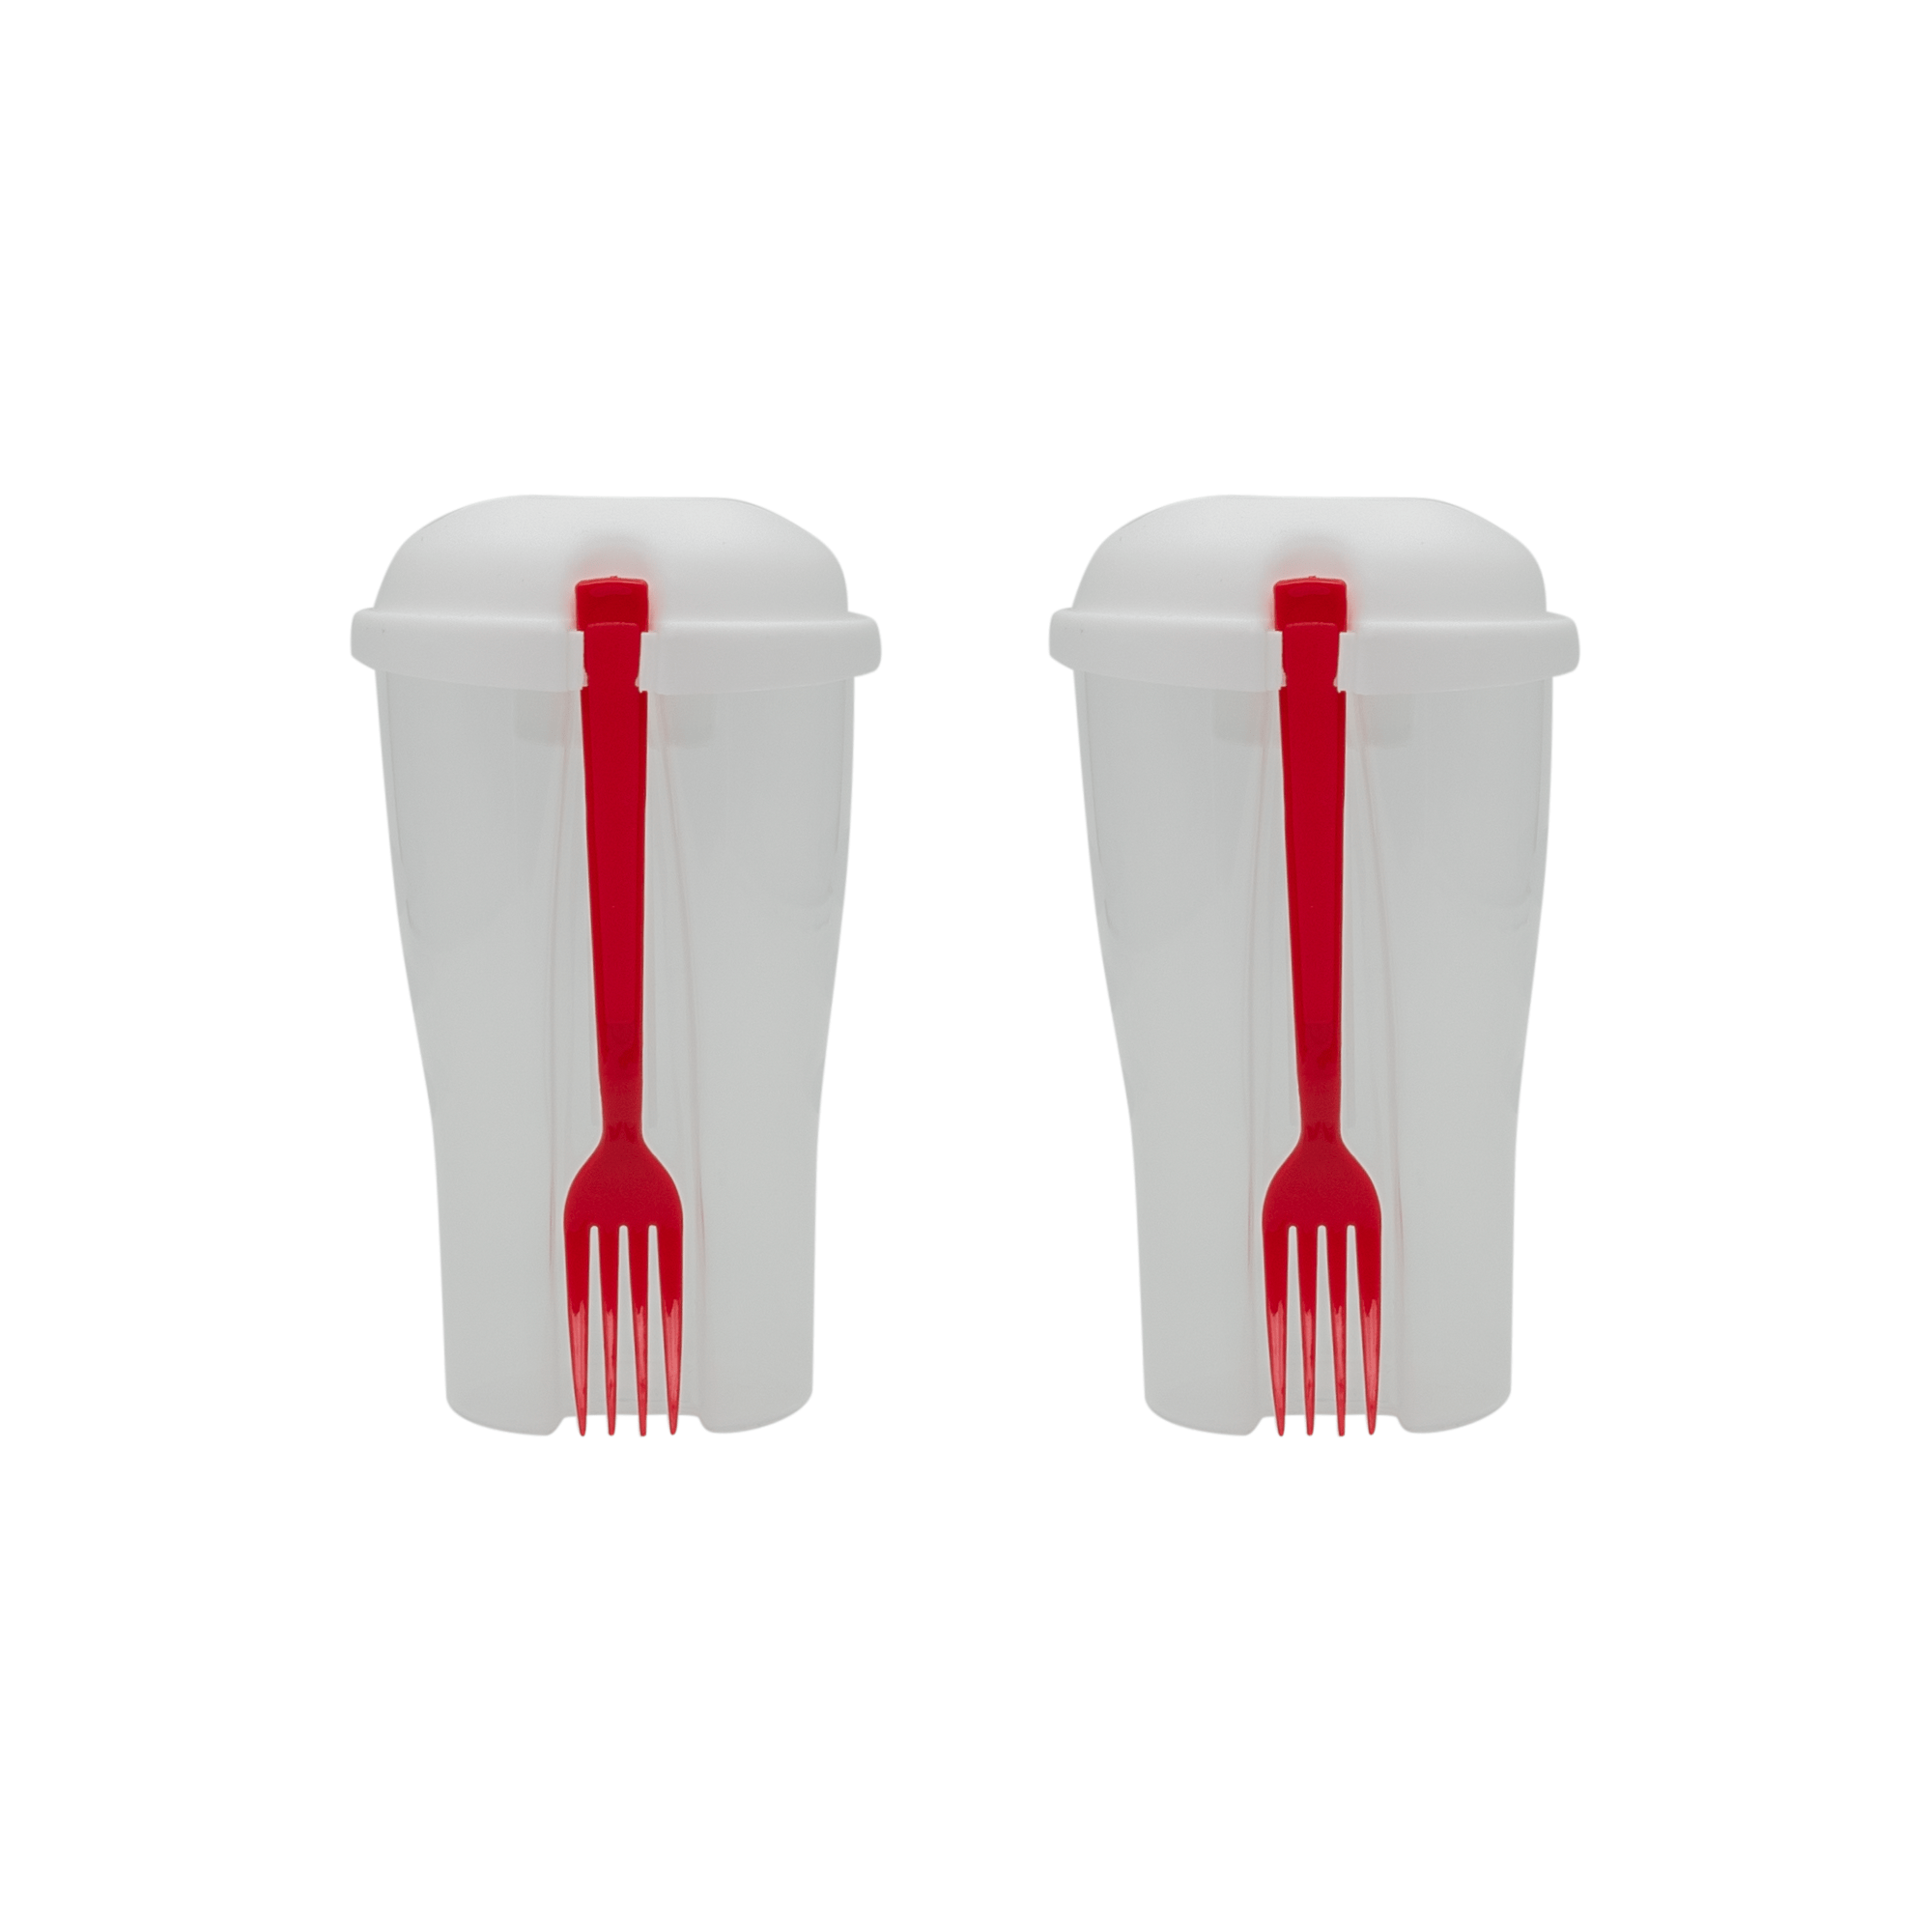 https://intelligentliving.com/wp-content/uploads/2022/05/Intelligent-Living.Portable-Upright-Lunch-Container-2-Pack-red.2.png